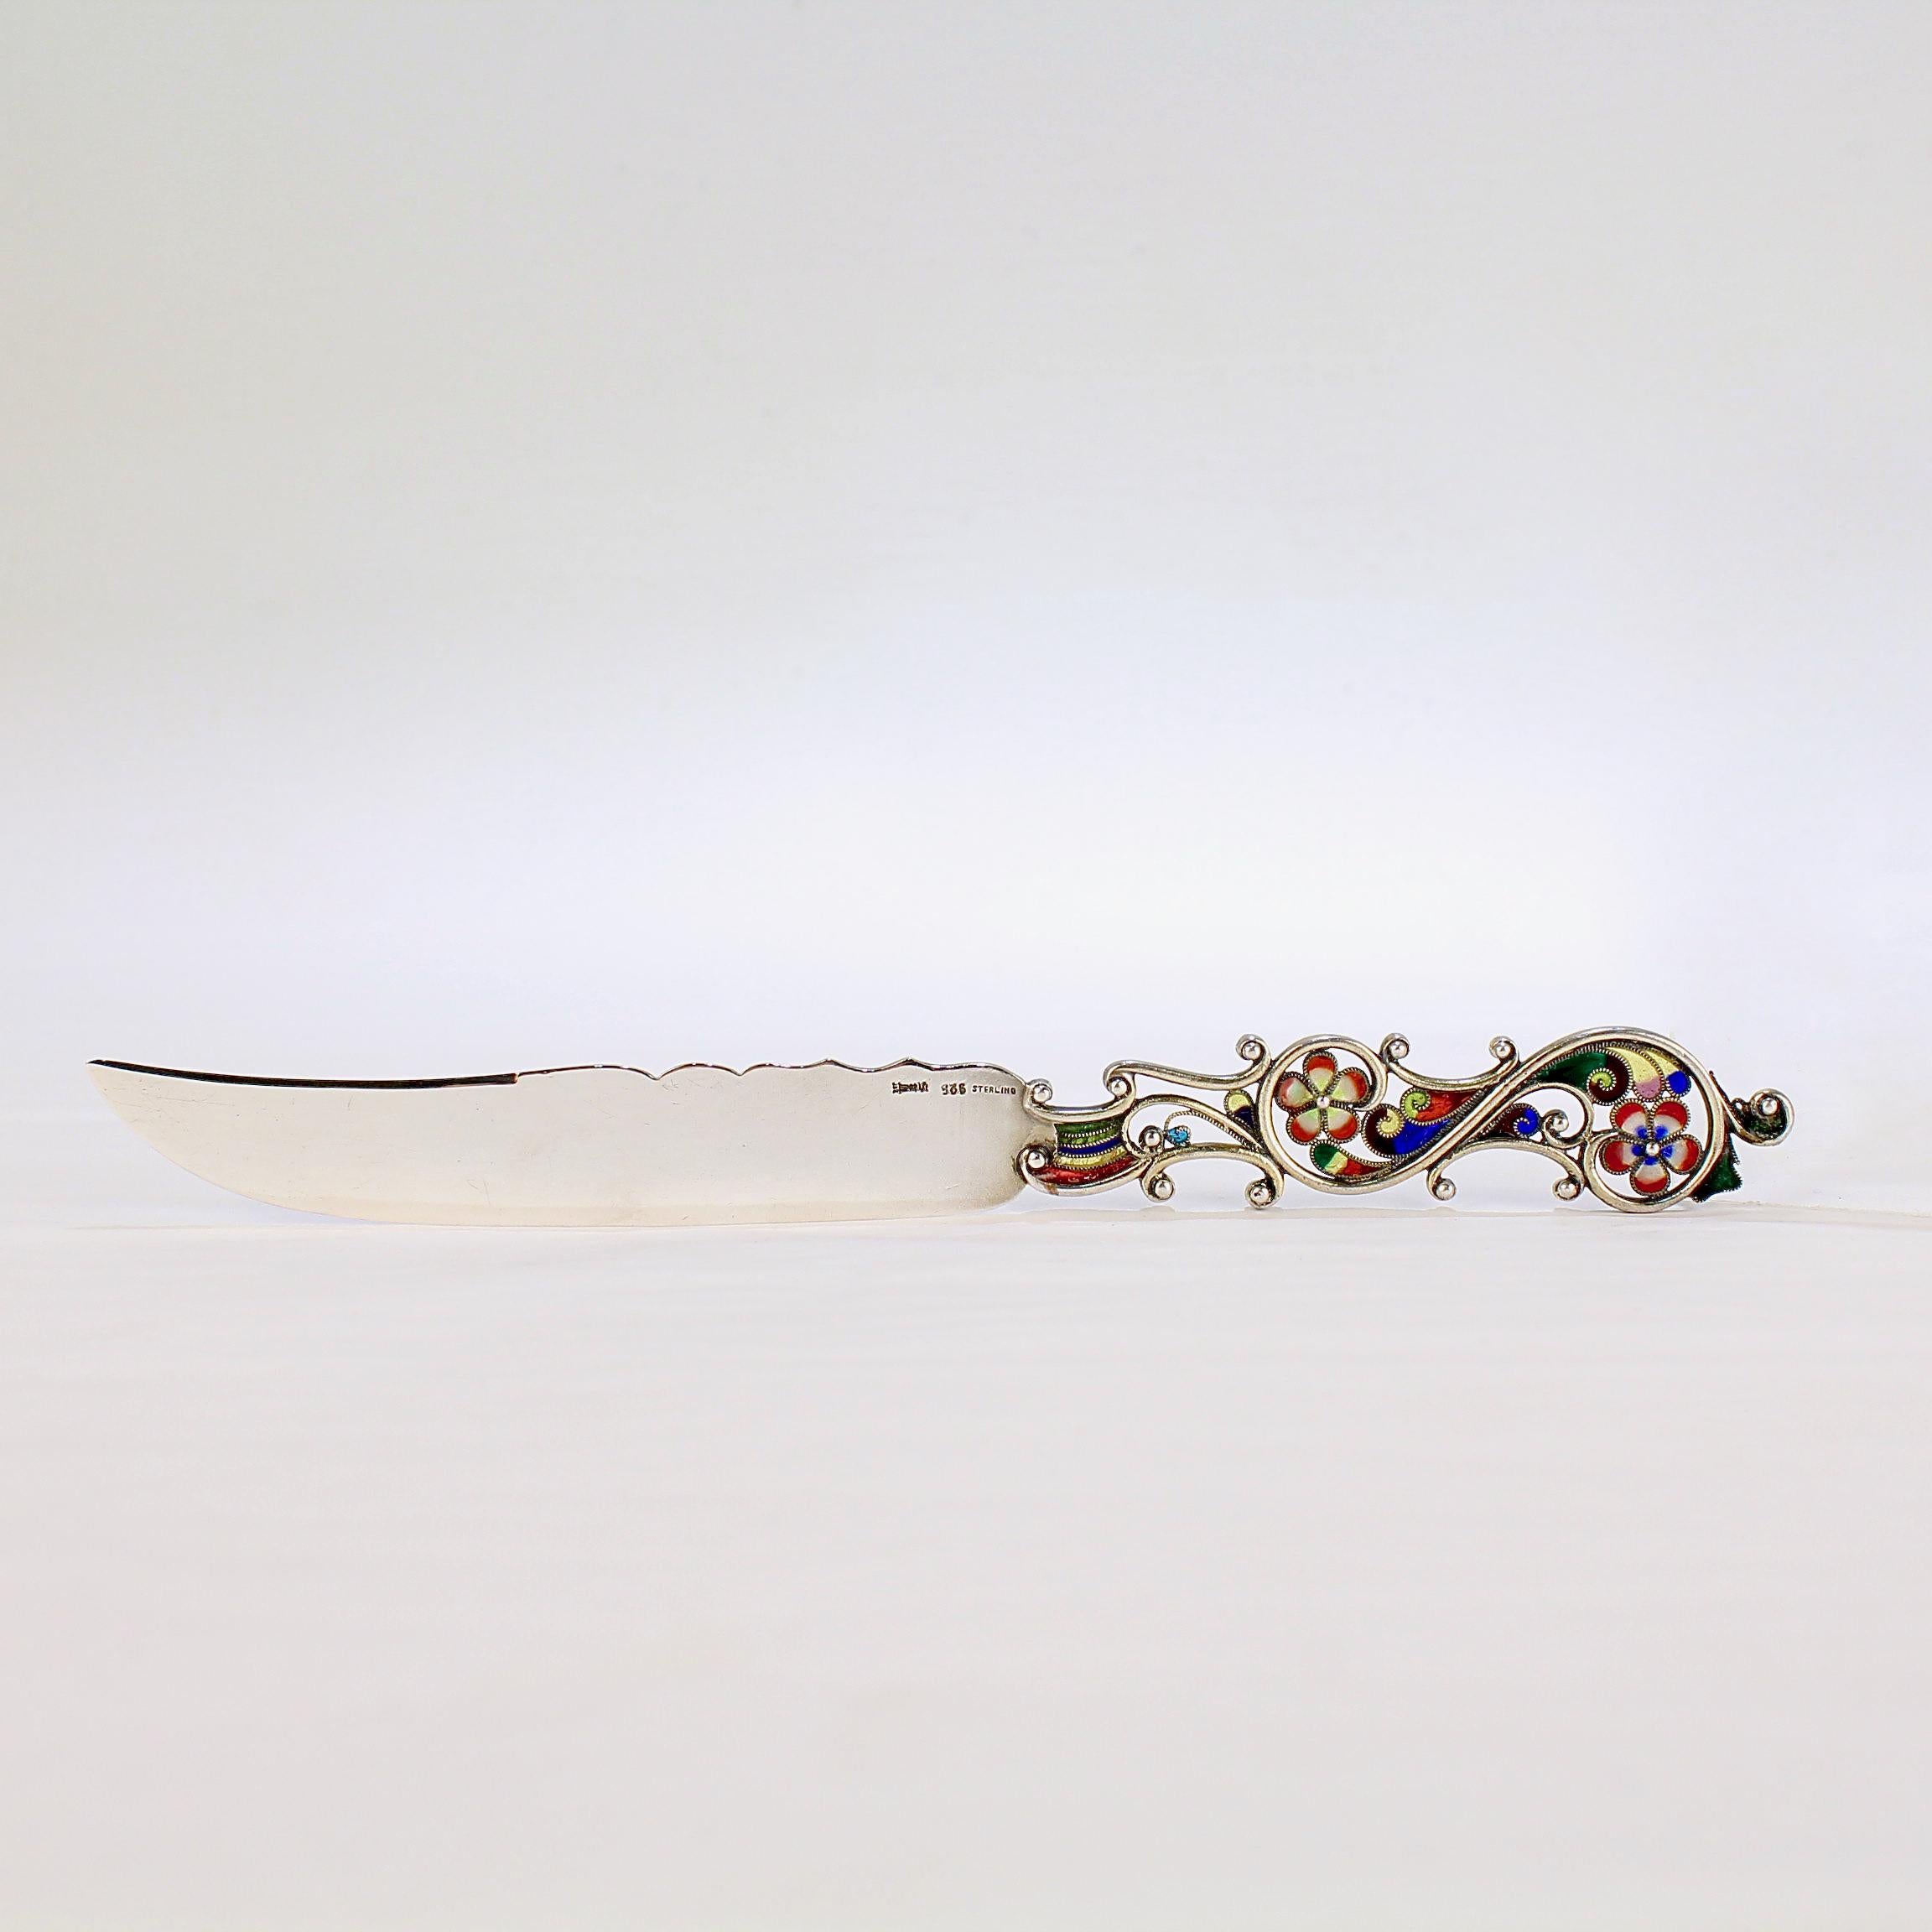 A fine antique letter opener or knife by David Andersen.

In sterling silver with plique a jour enamel decoration to the handle.

Simply a wonderful piece of silver in the Russian or Baltic taste!

Date:
Early 20th Century

Overall Condition:
It is